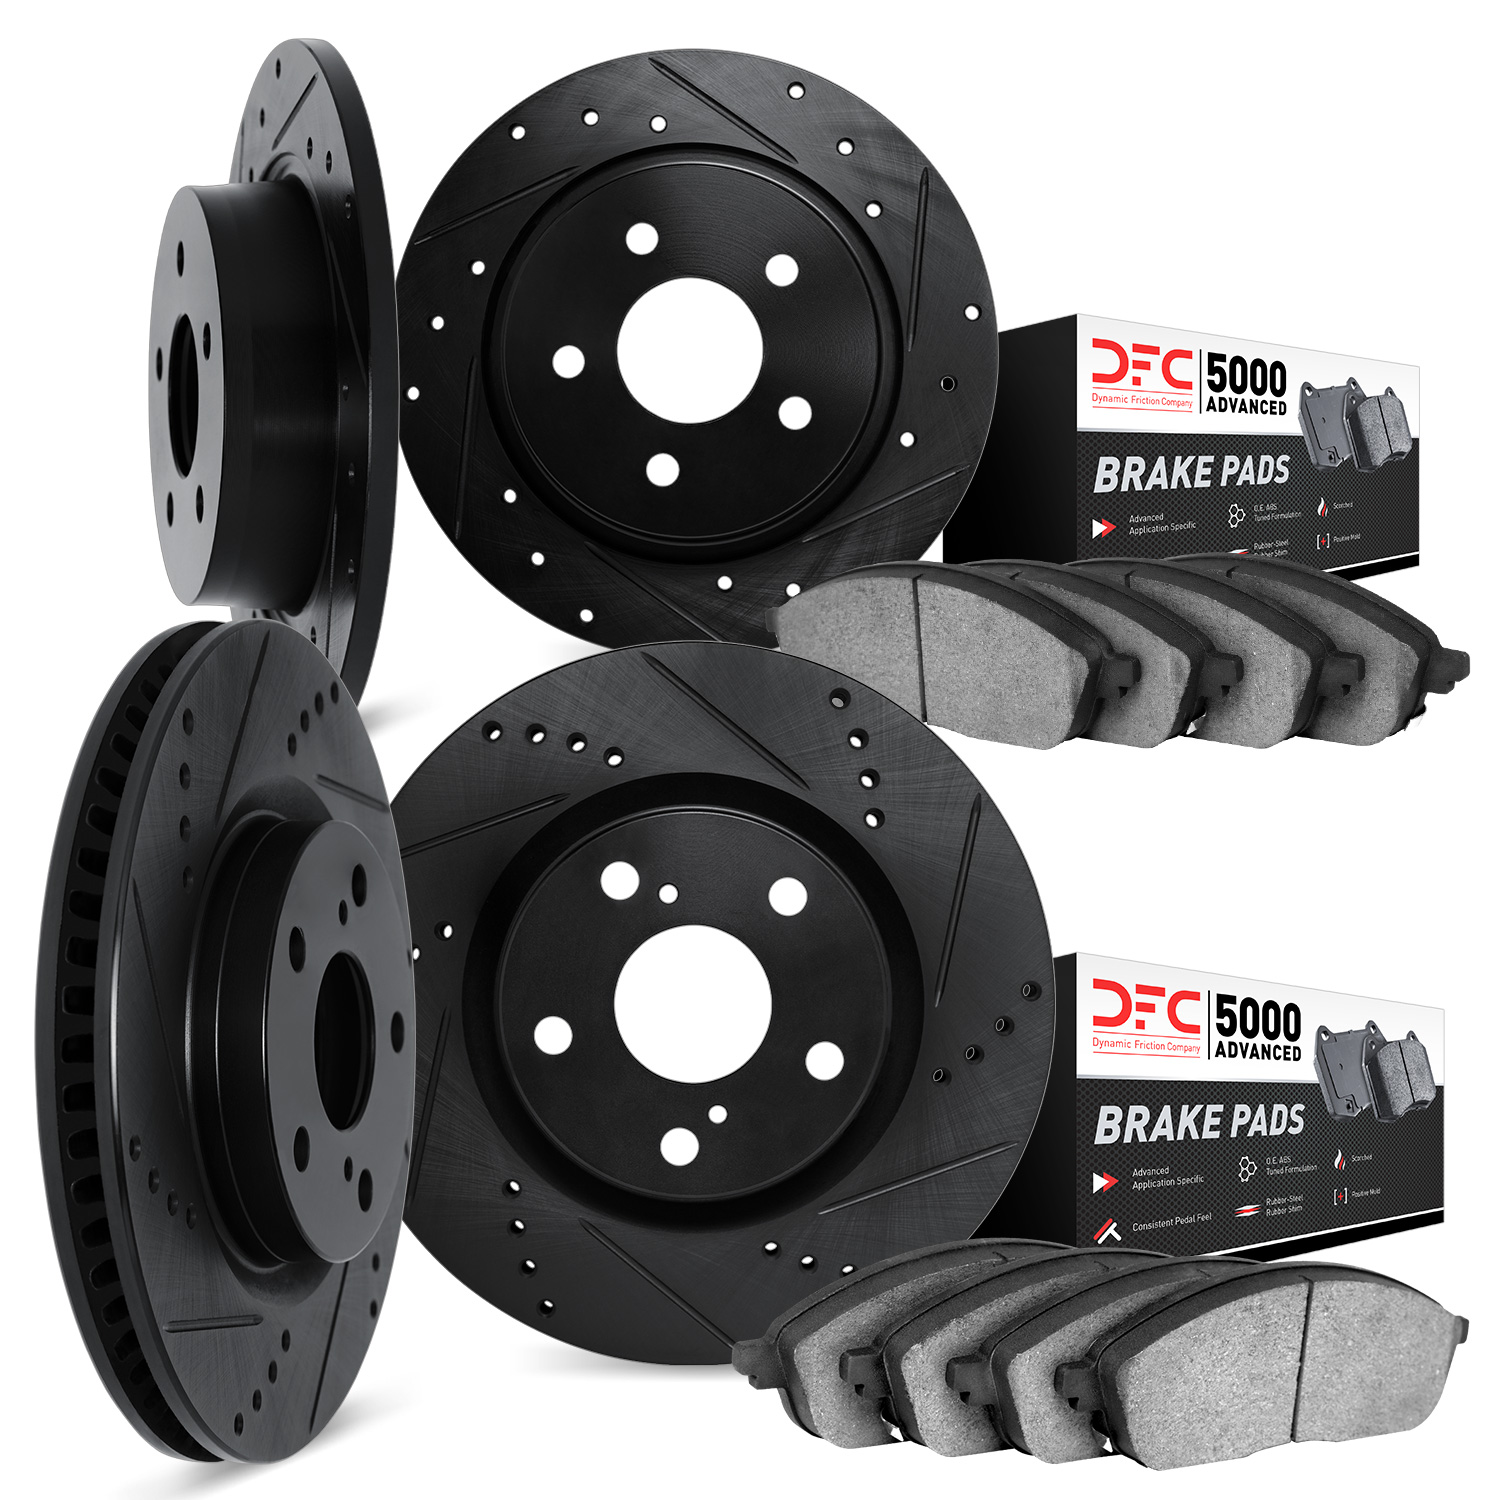 8504-68003 Drilled/Slotted Brake Rotors w/5000 Advanced Brake Pads Kit [Black], 1990-1993 Infiniti/Nissan, Position: Front and R